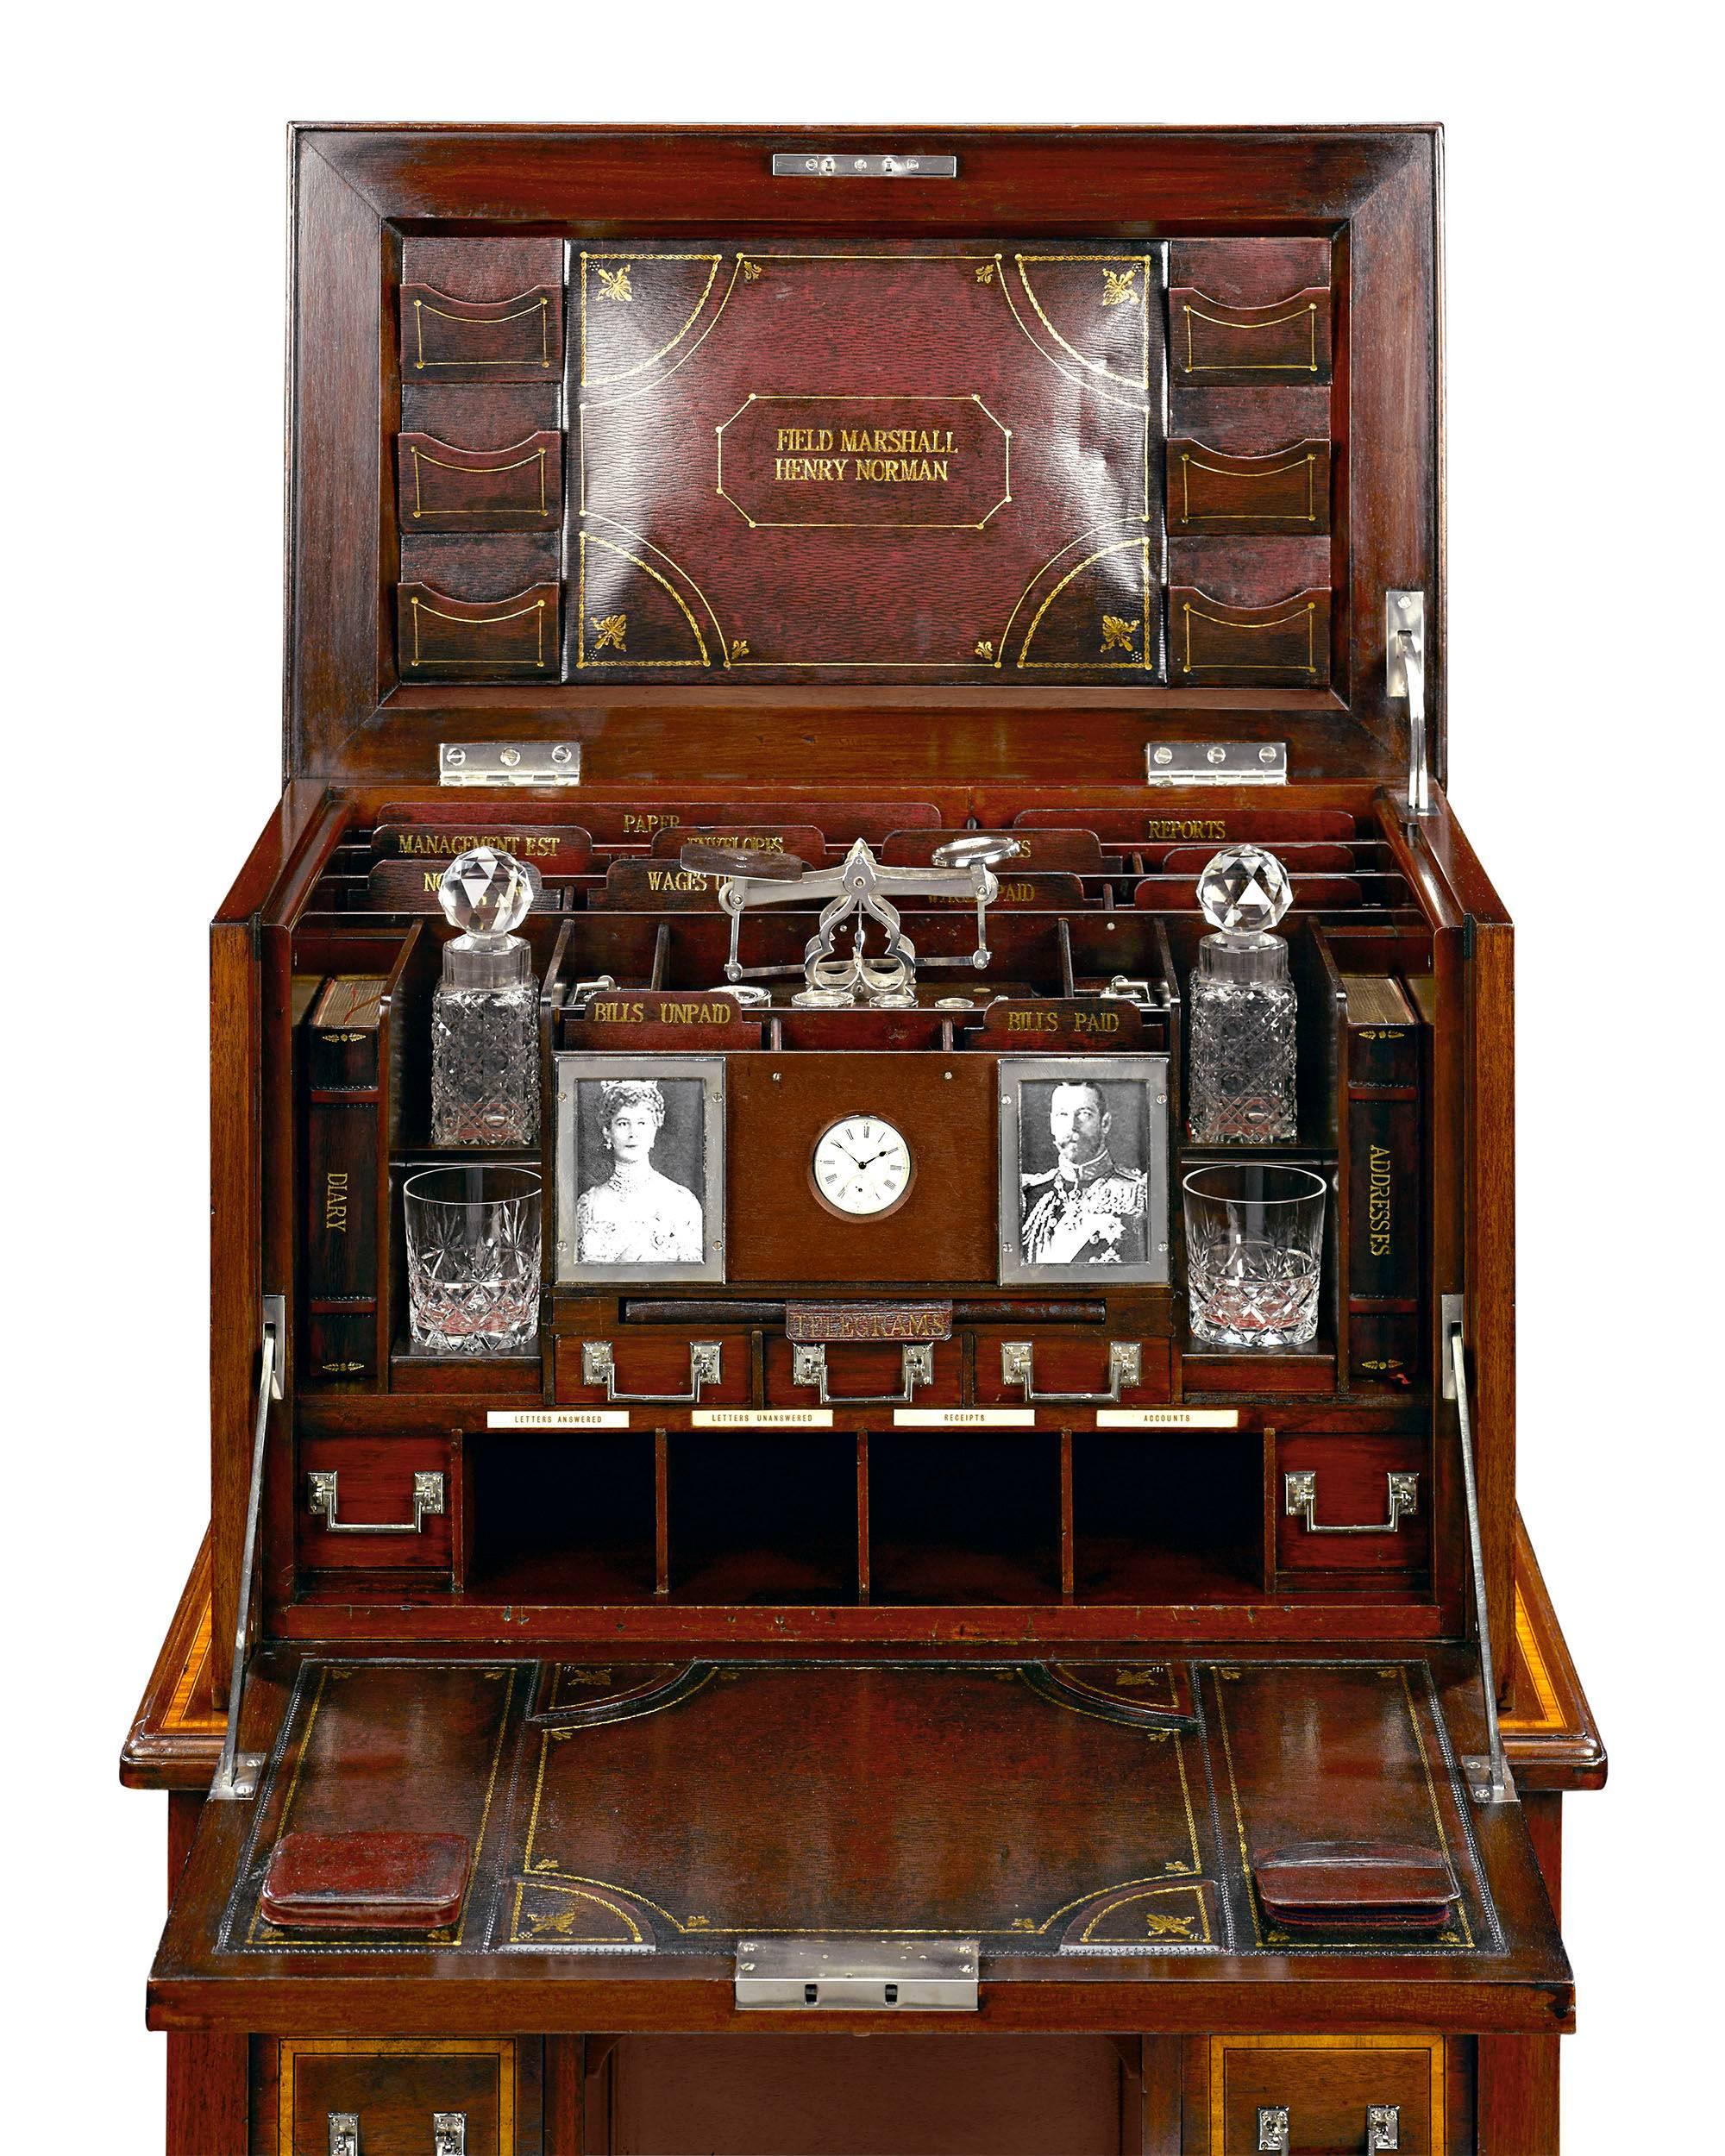 This extraordinary and rare English desk is an impeccable example of English Campaign furniture. Crafted of mahogany, this compact desk was given to Field Marshal Sir Henry Wylie Norman, a British Colonial administrator and senior officer of the